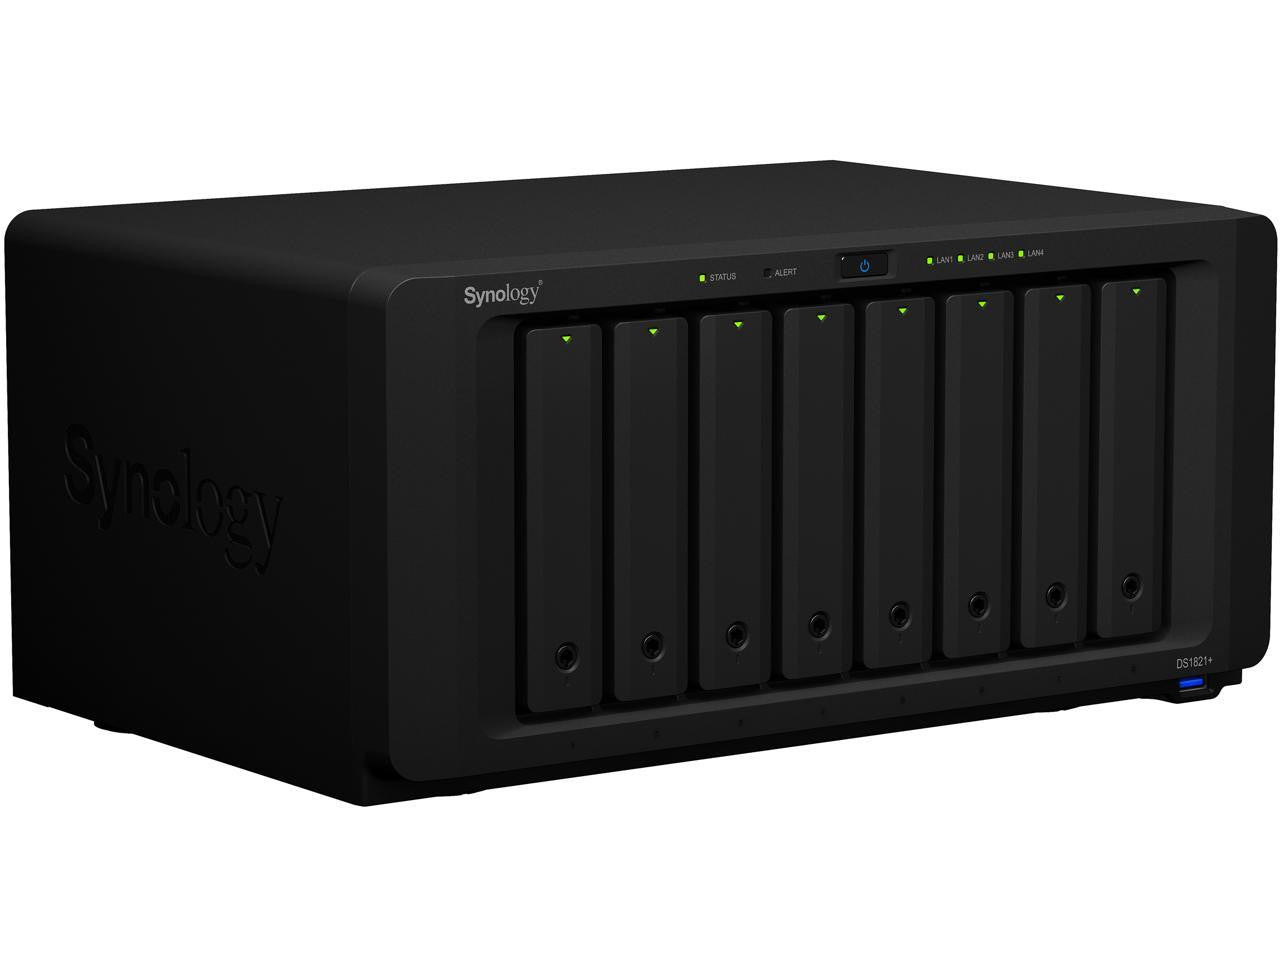 Synology DS1821+ 8-BAY DiskStation with 16GB Synology RAM and 80TB (8x10TB) Western Digital RED PLUS Drives Fully Assembled and Tested